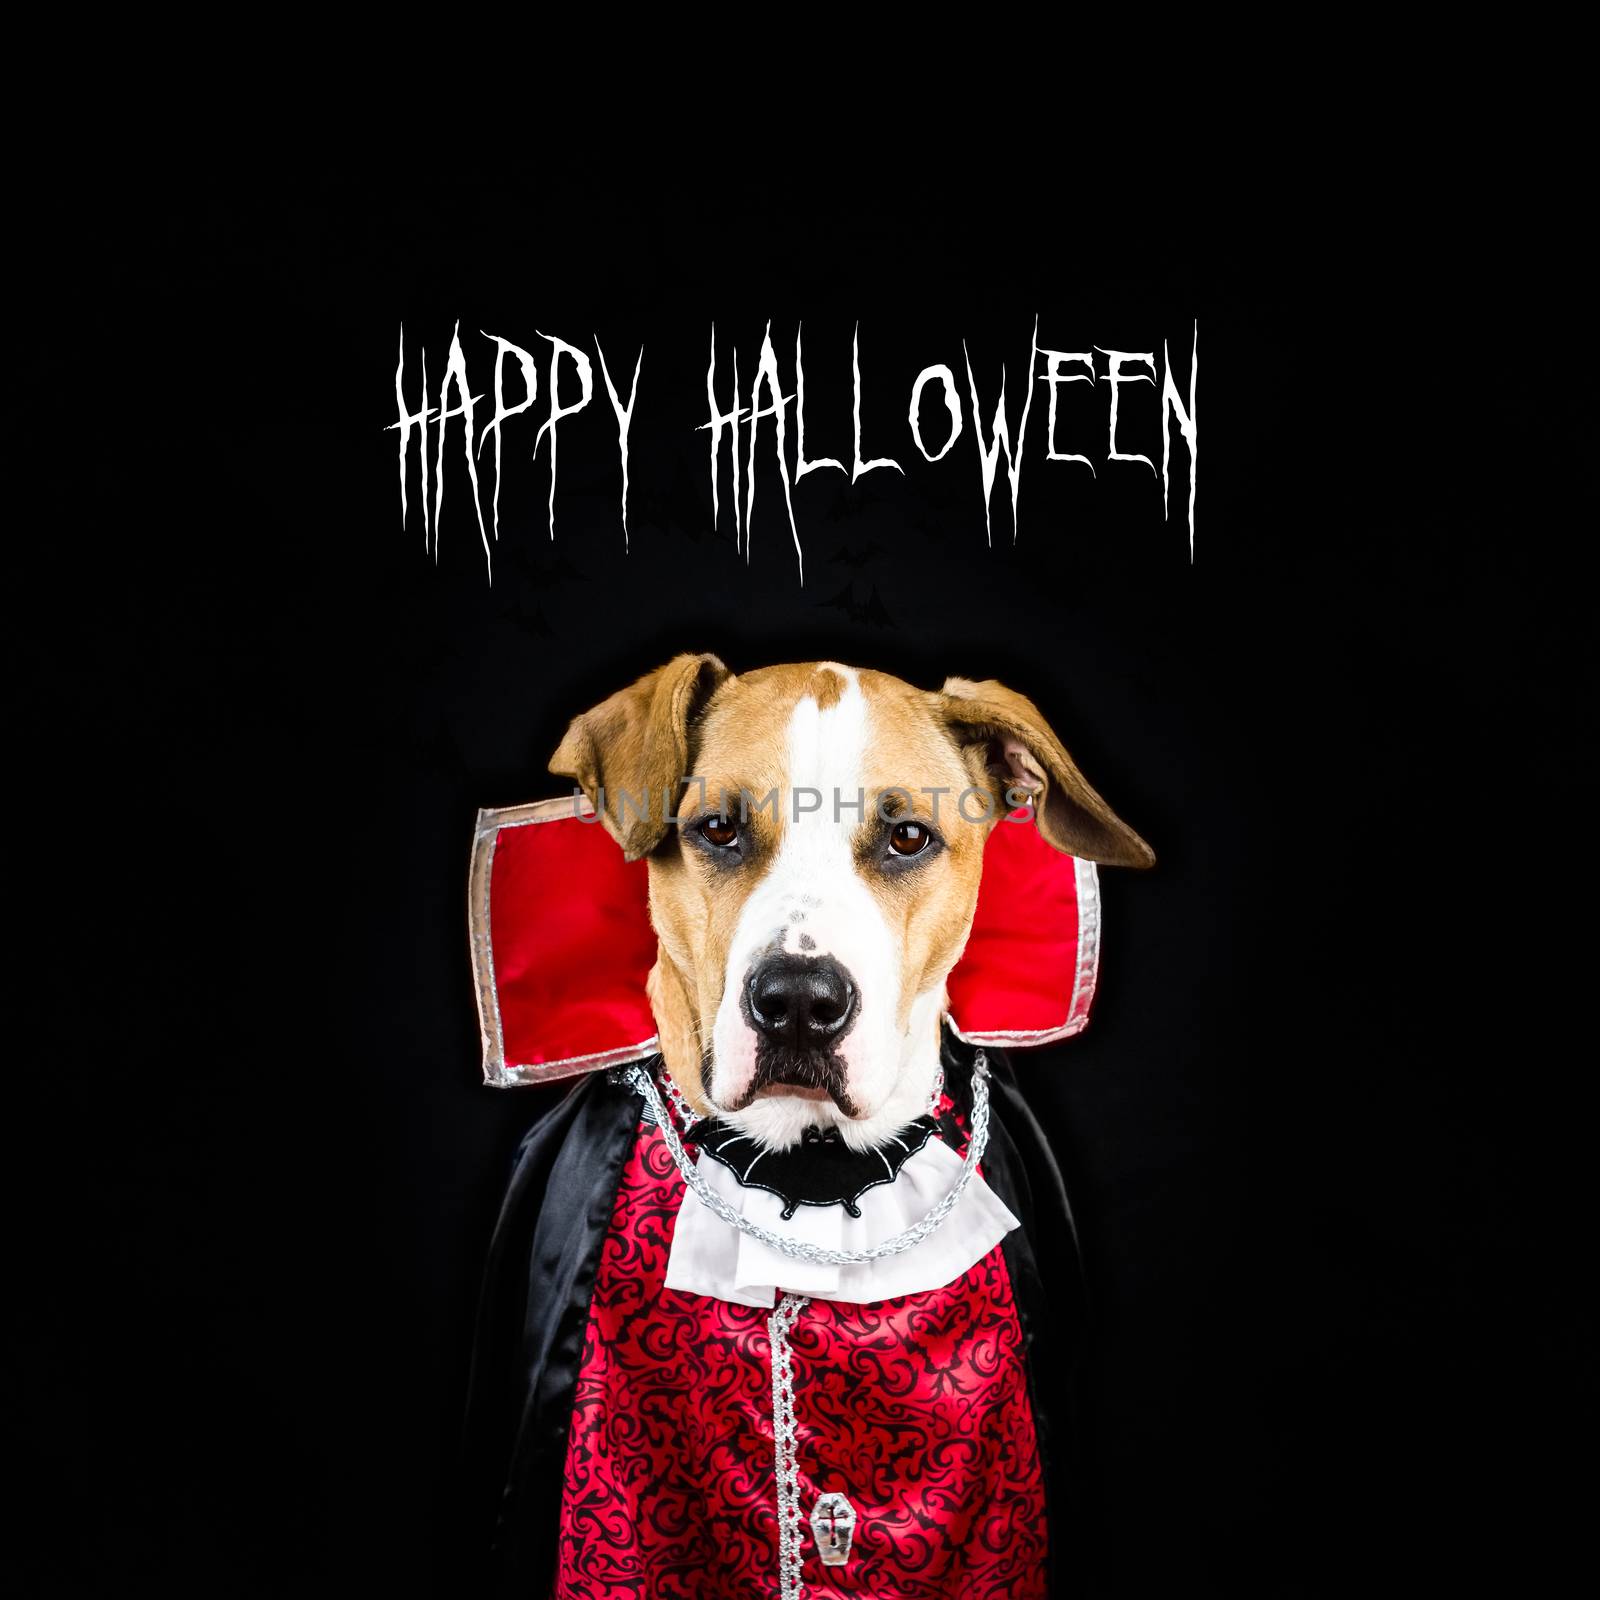 Happy halloween poster with dog in vampire costume by photoboyko